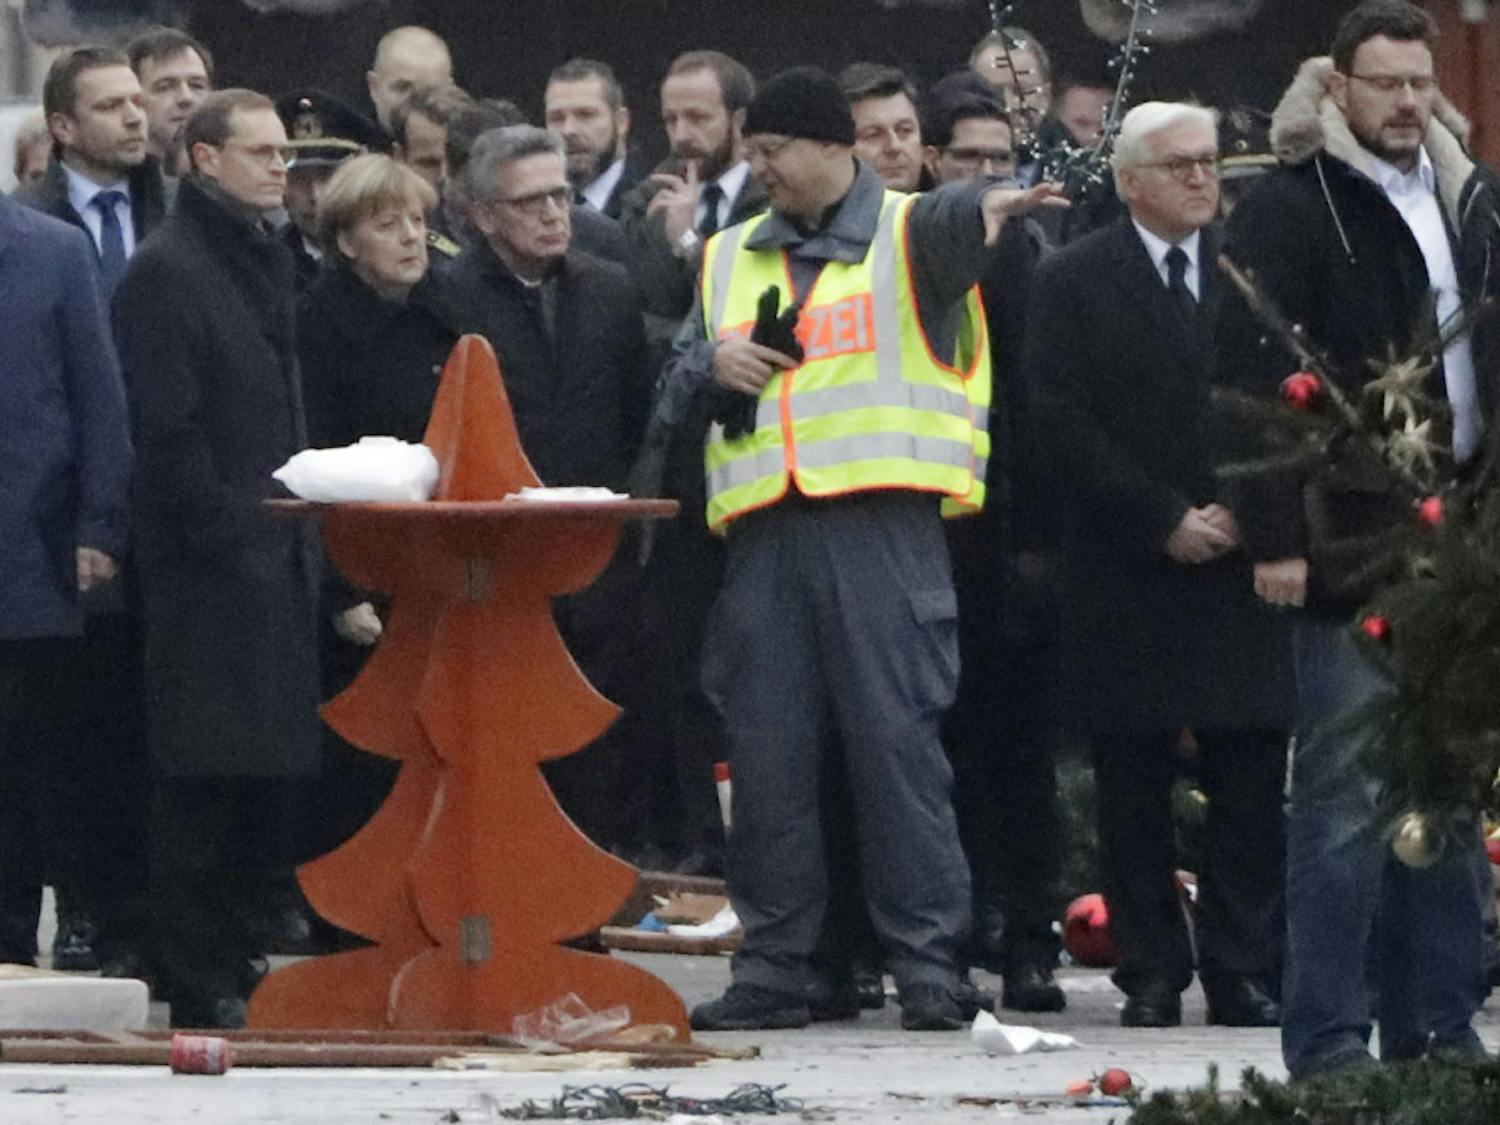 German Chancellor Angela Merkel, third from left, Interior Minister Thomas de Maiziere, fourth from left, and German Foreign Minister Frank-Walter Steinmeier, second from right, visit the site of the attack in Berlin, Germany, Tuesday, Dec. 20, 2016, the day after a truck ran into a crowded Christmas market and killed several people.&nbsp;